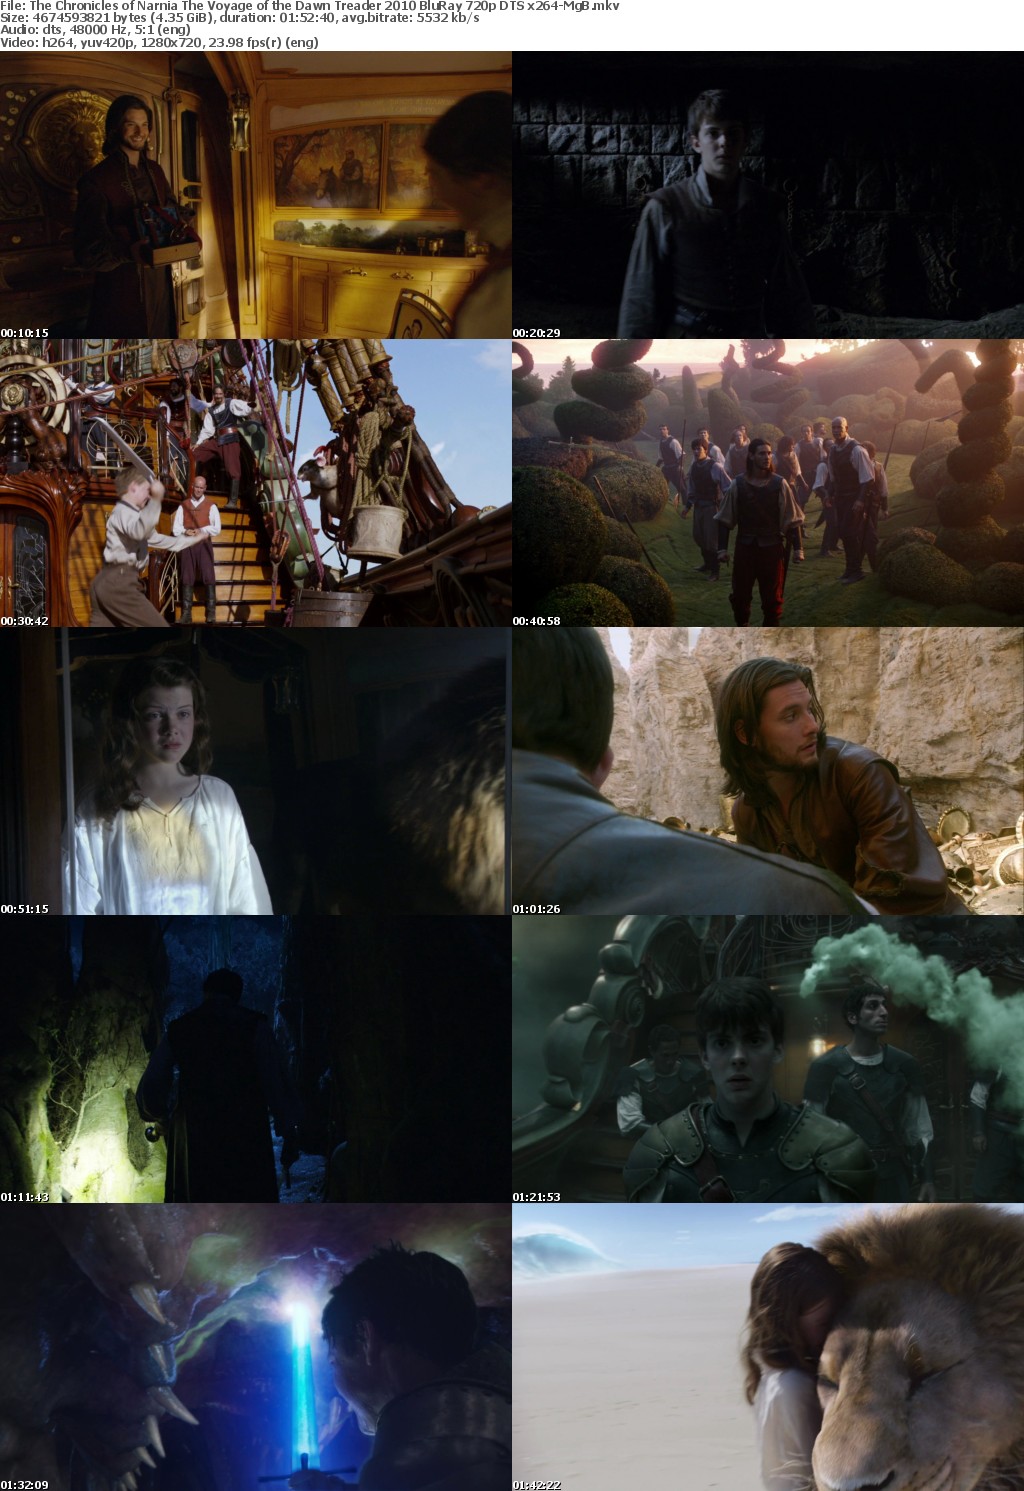 The Chronicles of Narnia The Voyage of the Dawn Treader 2010 BluRay 720p DTS x264-MgB